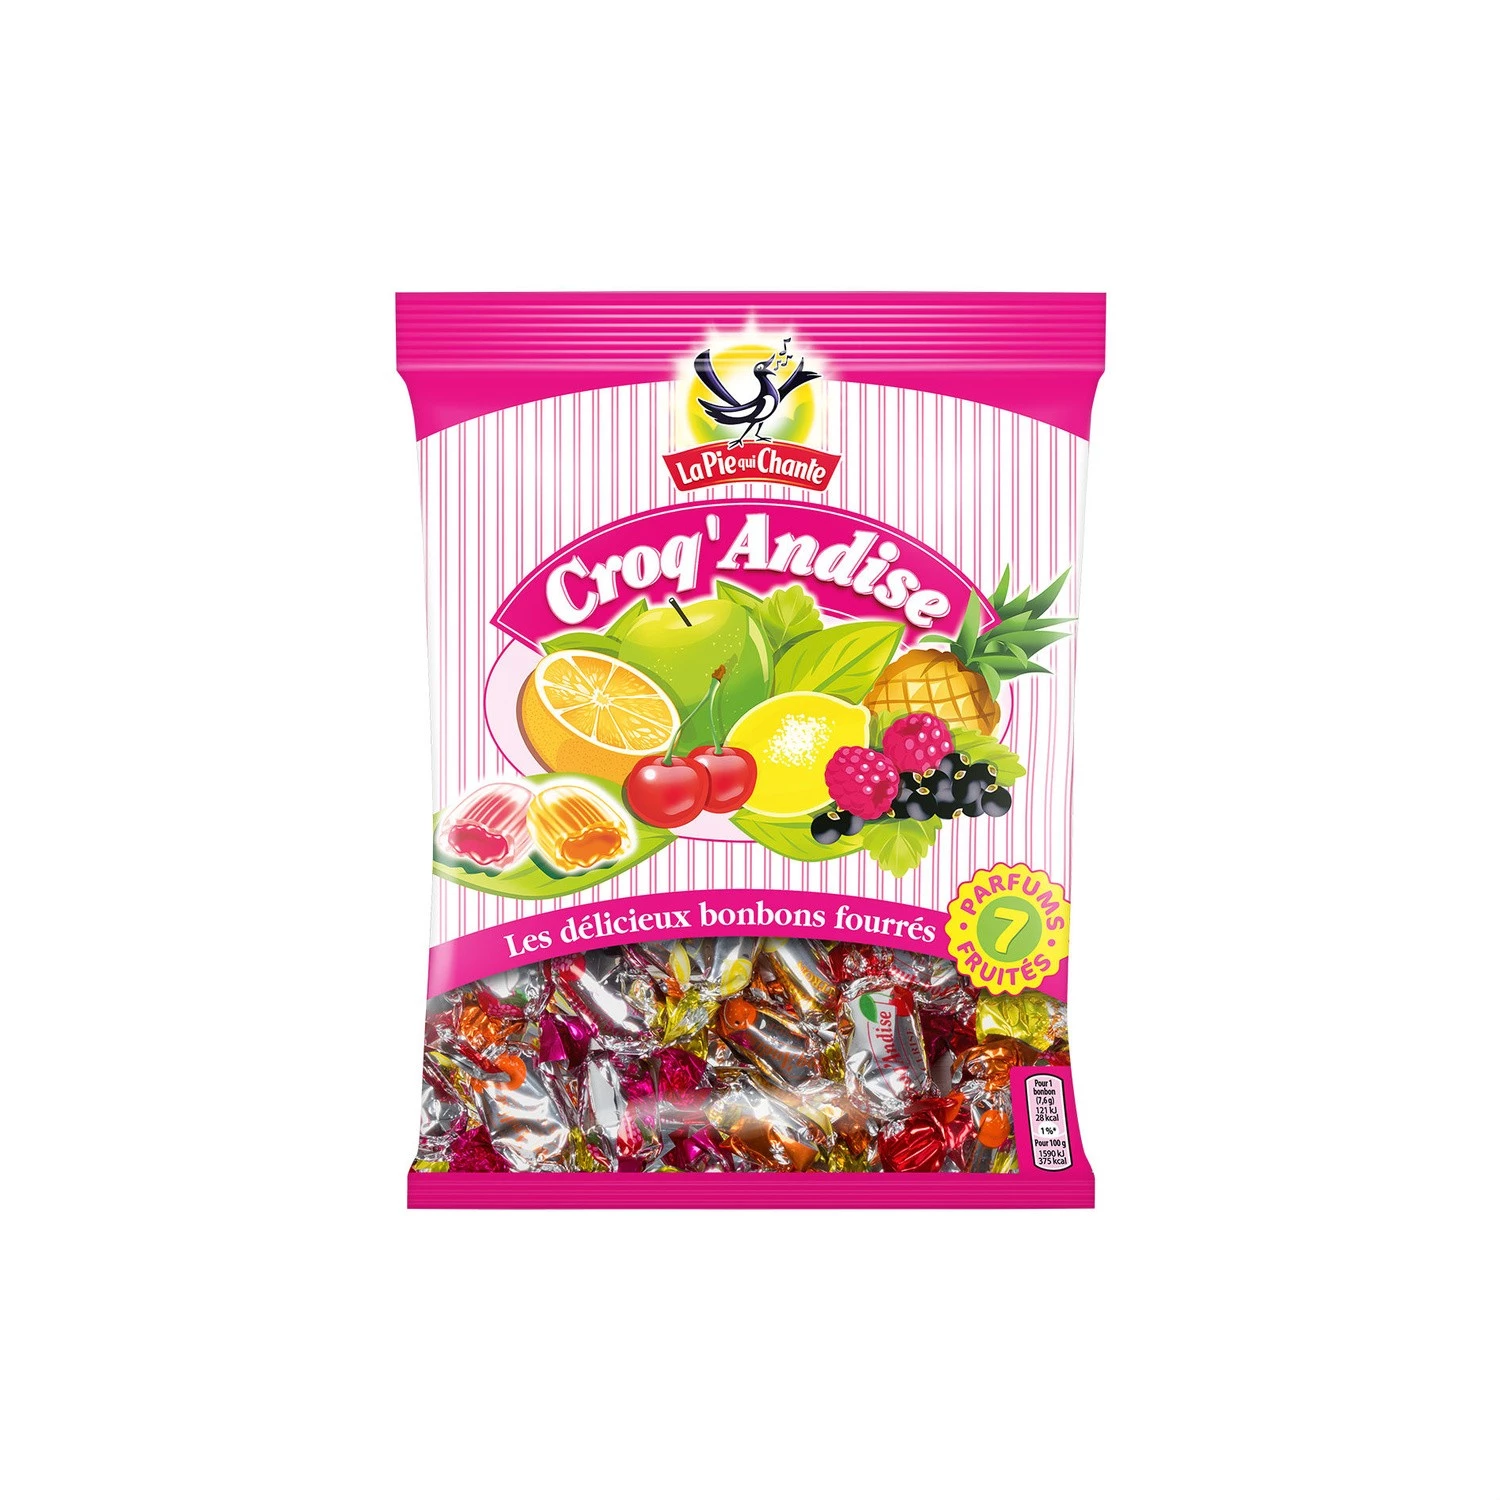 Assortment of Croq'Andise sweets 360g - THE SINGING PIE